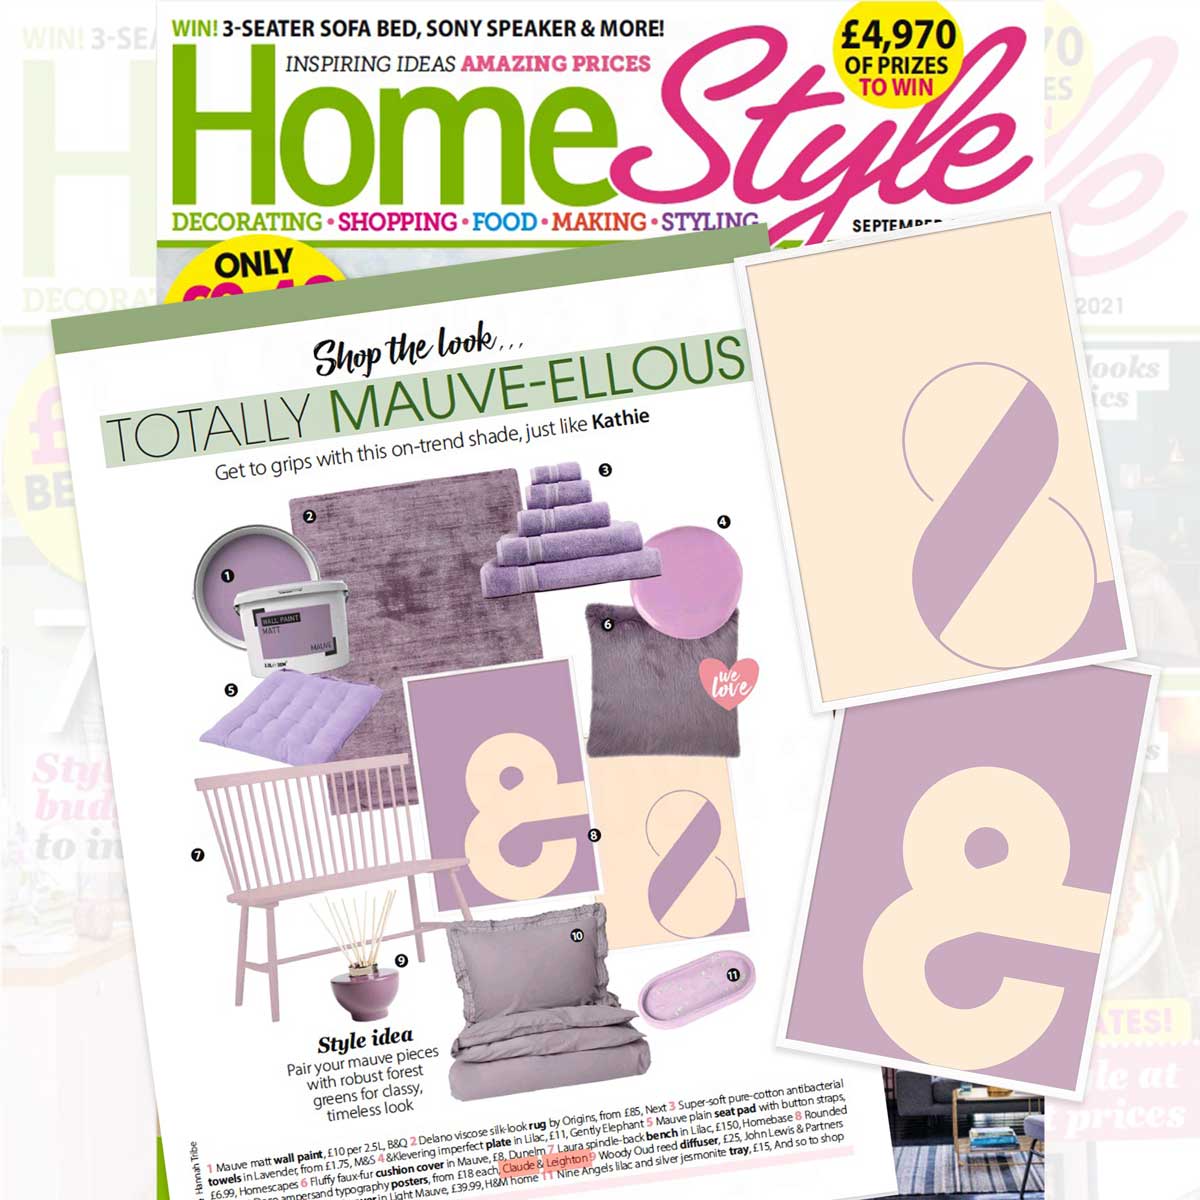 Lavender & champagne ampersand typography art prints featured in HomeStyle magazine